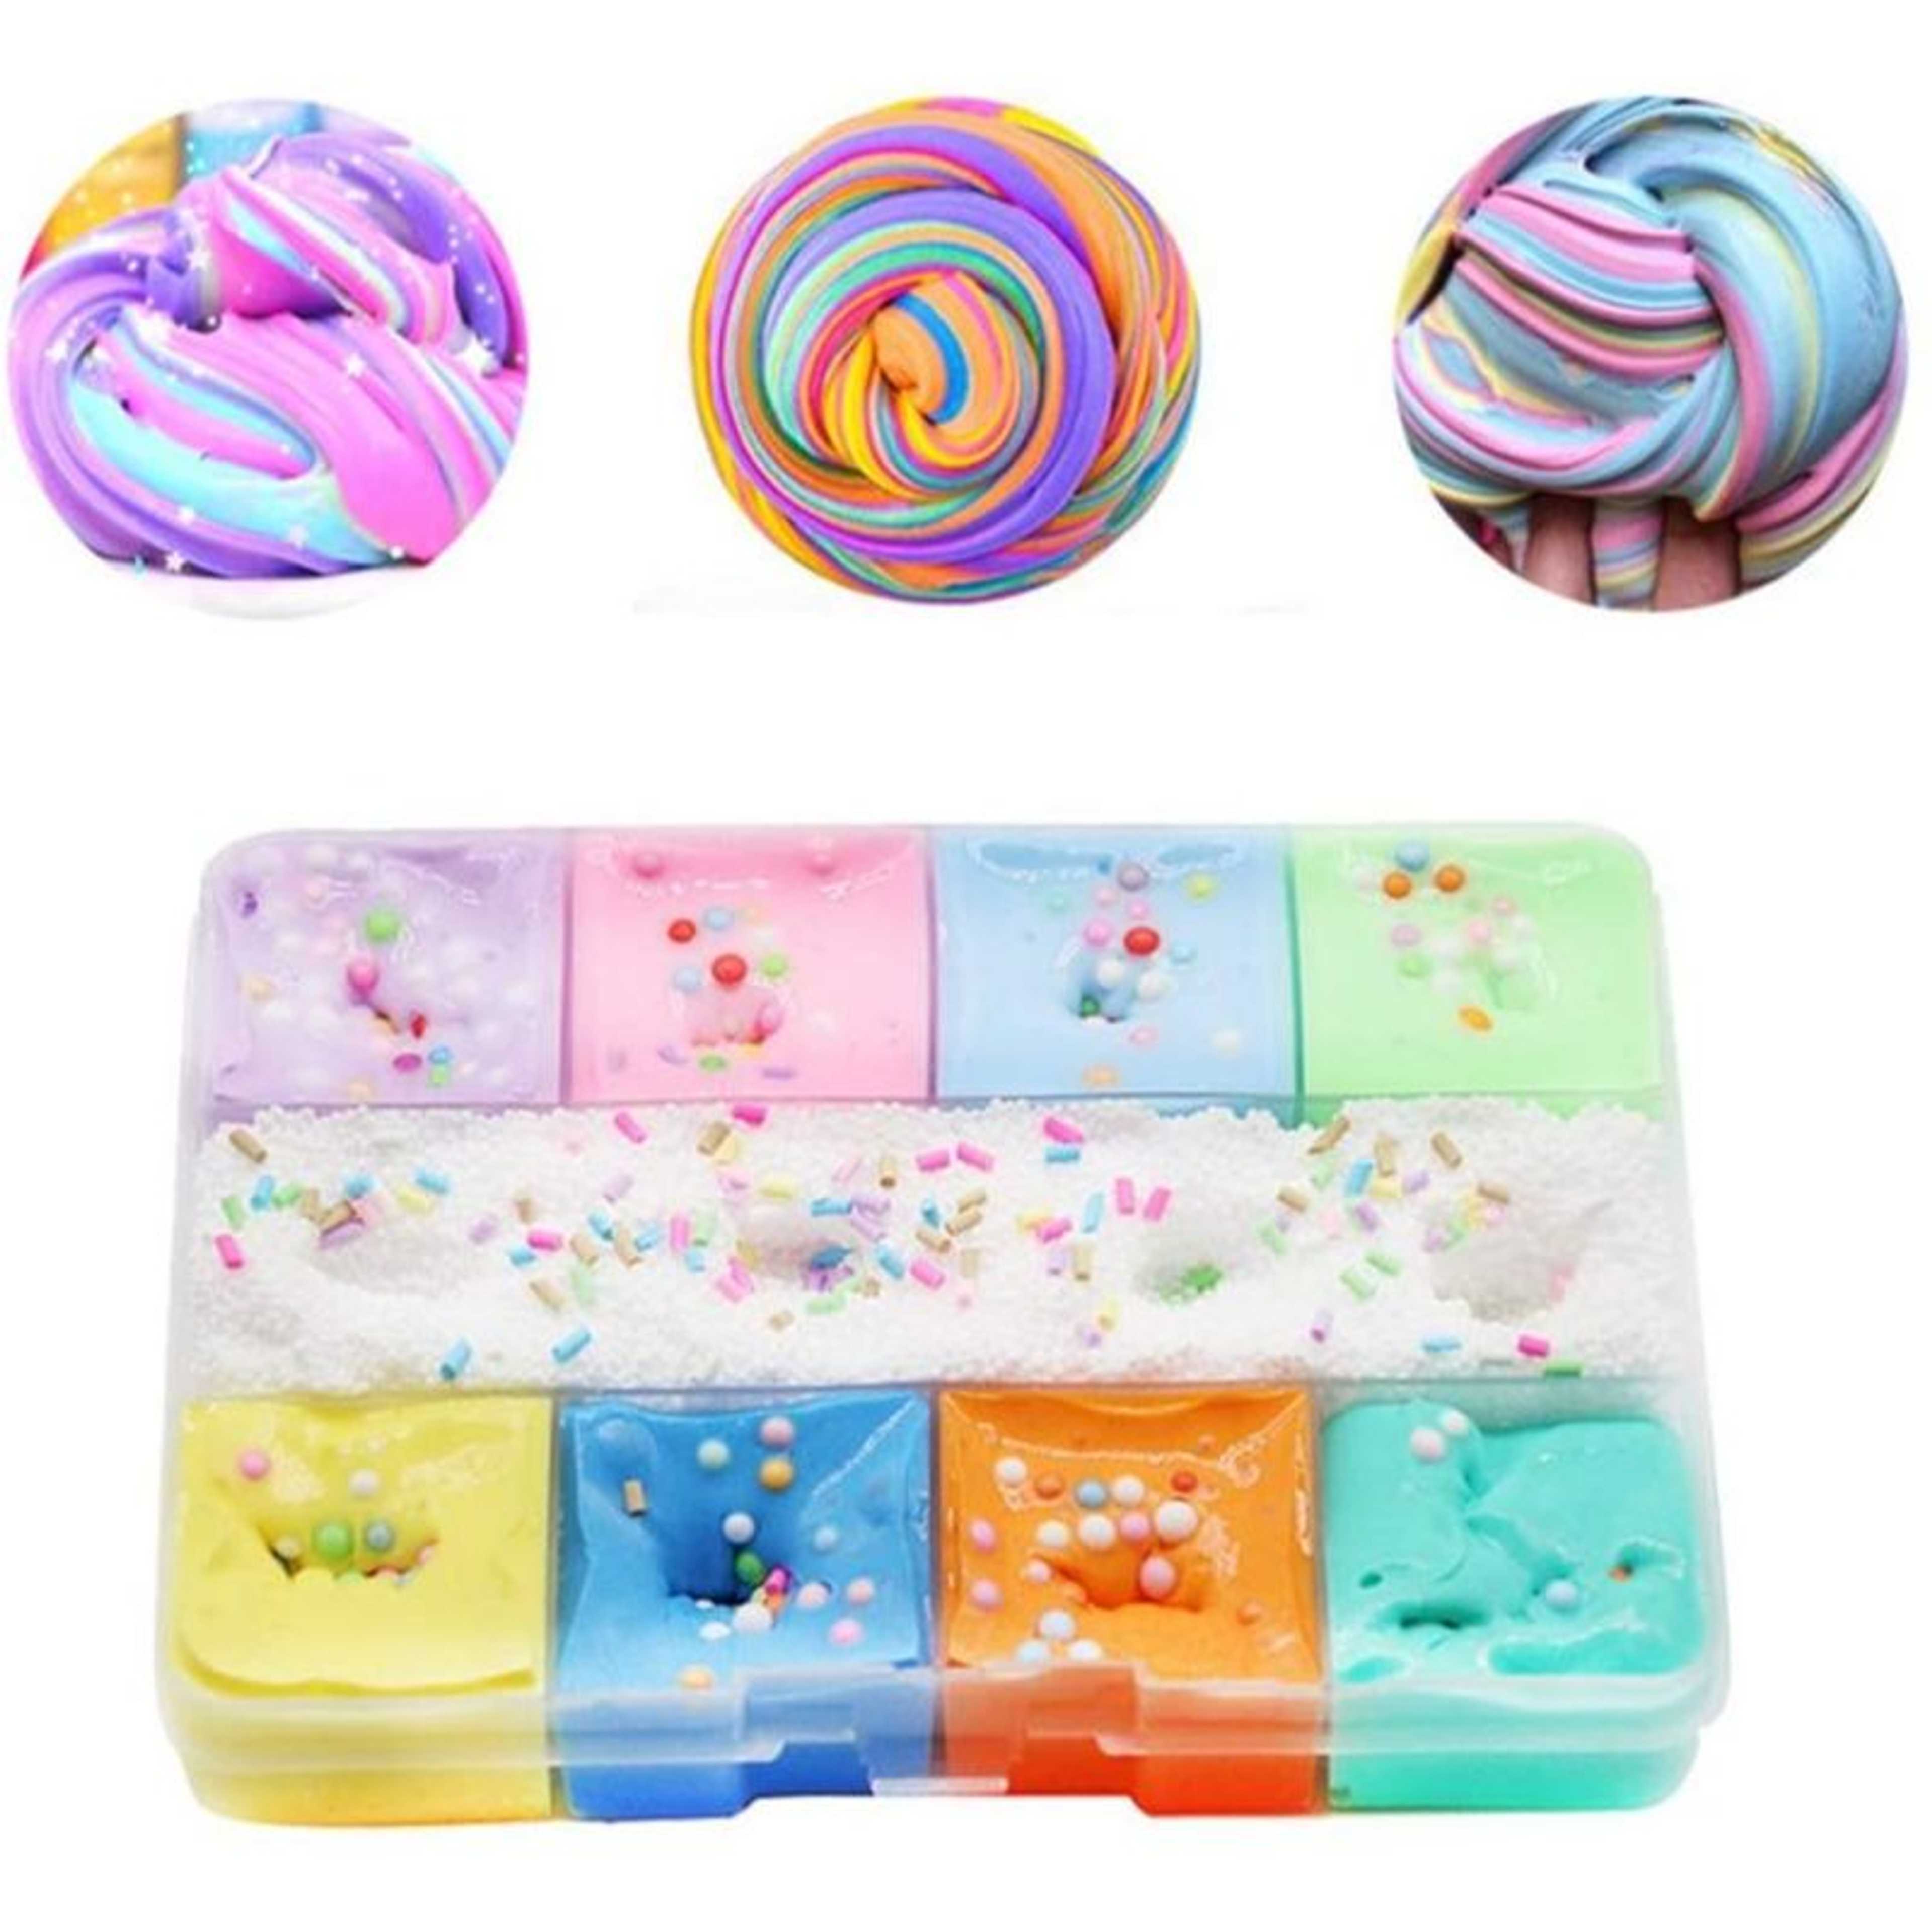 9 Color Mixing Mud Slime Kit 120grams, 9 Grids Fluffy Slime Fluffy Putty Foam Slime Kit, Multicolored Stress Relief Toy Super Soft and Non-Sticky Slime